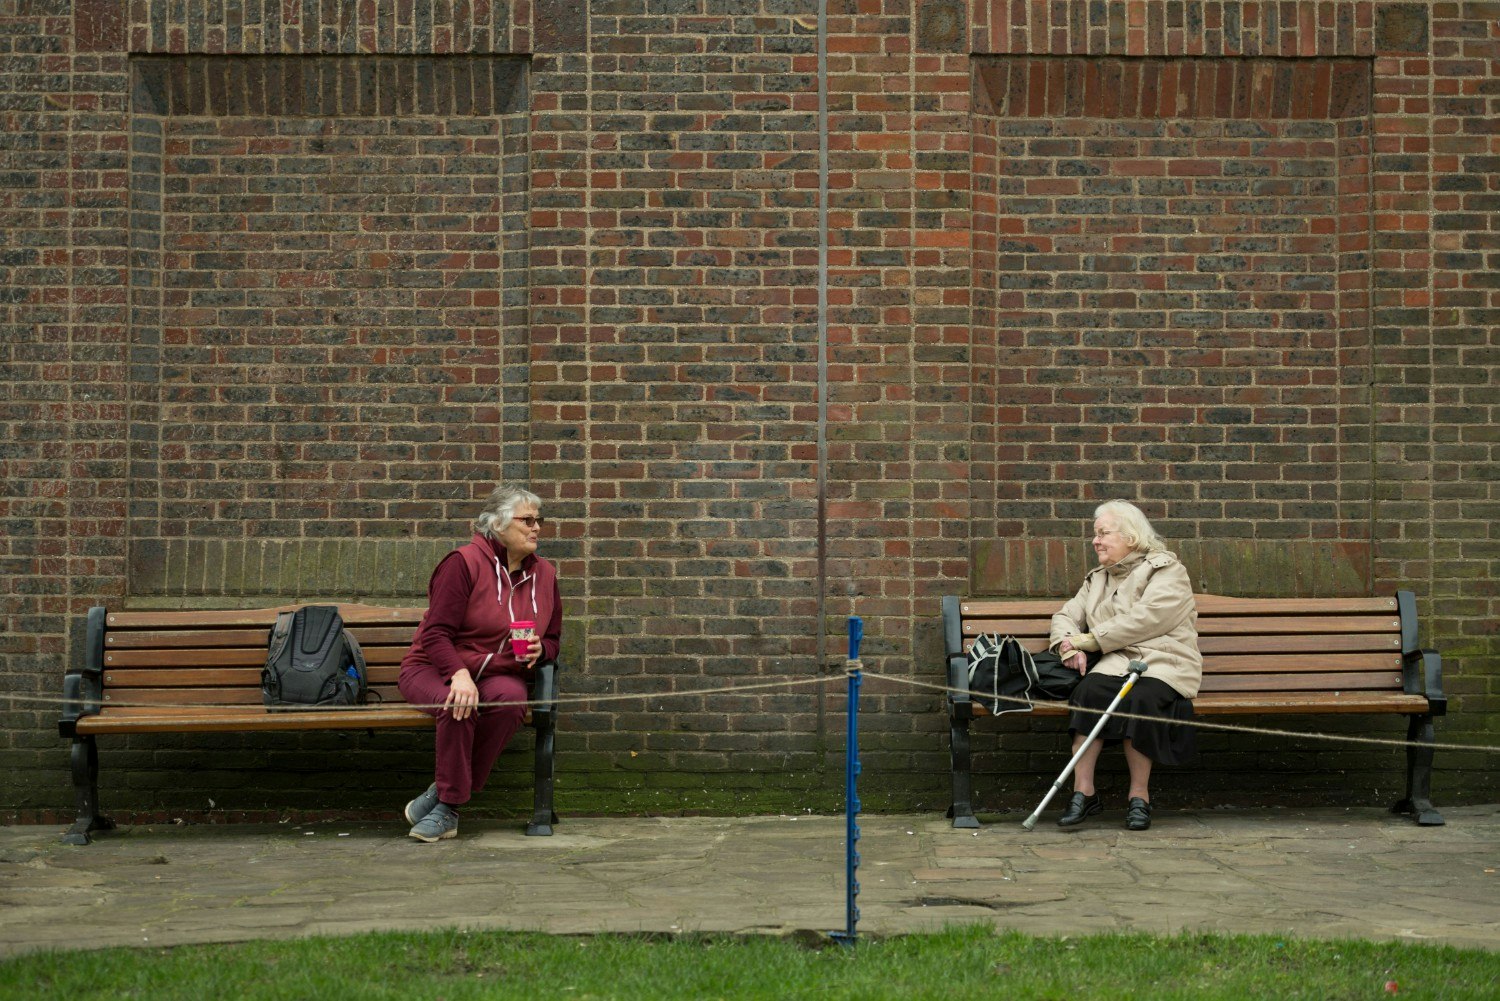 Two elderly women sitting on benches practising social distancing.